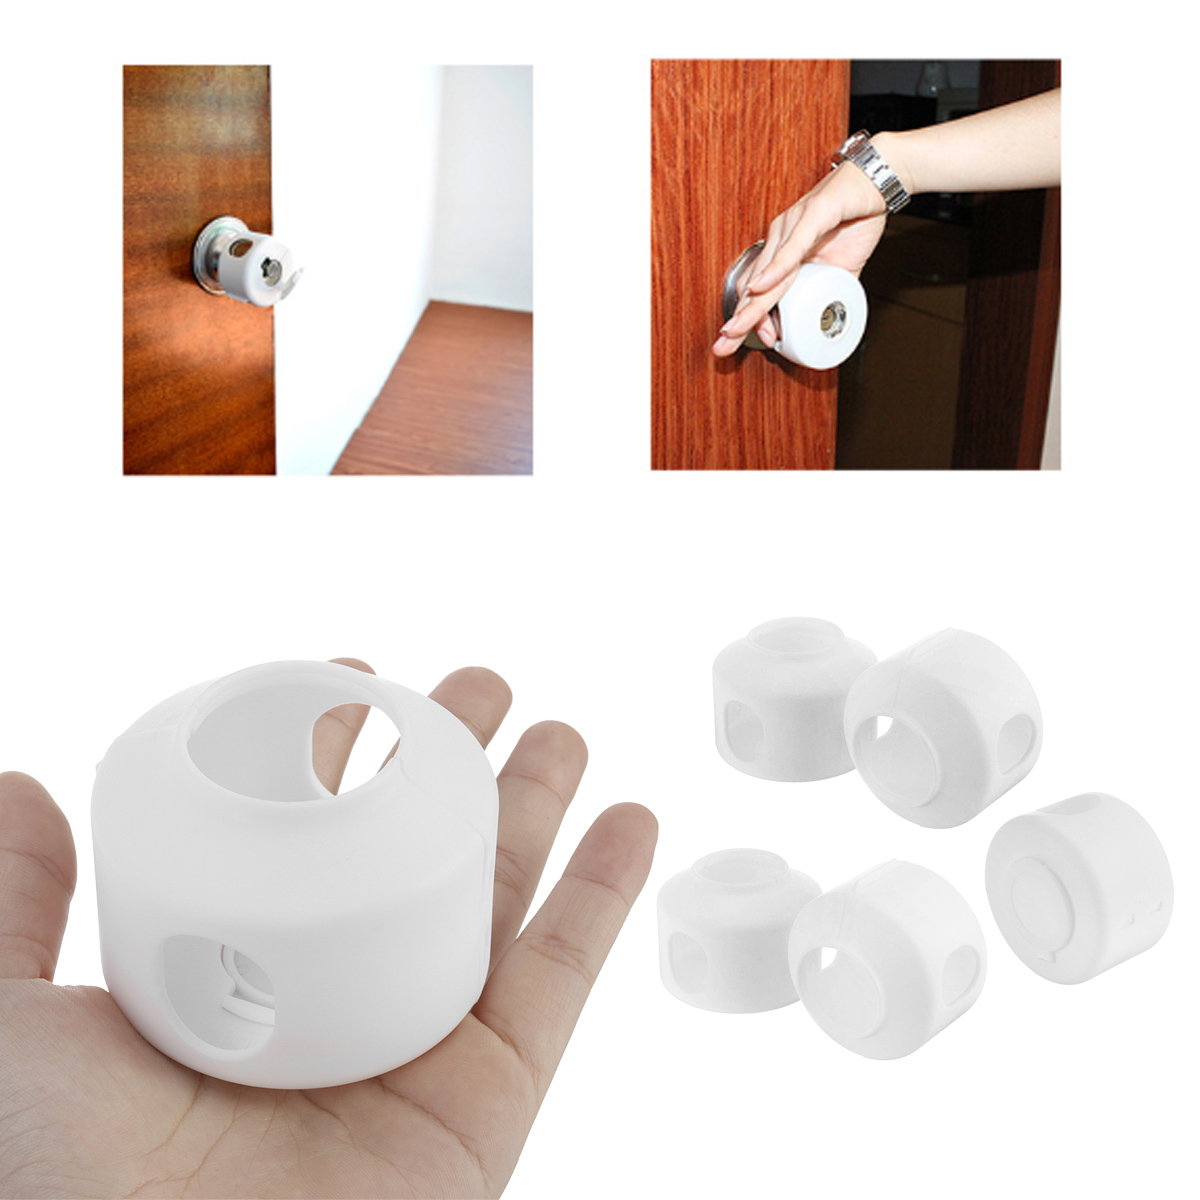 5PCS-Child-Proof-Safety-Doors-Handle-Bedroom-Protective-Door-Knob-Safety-Cover-Lockable-1730878-2